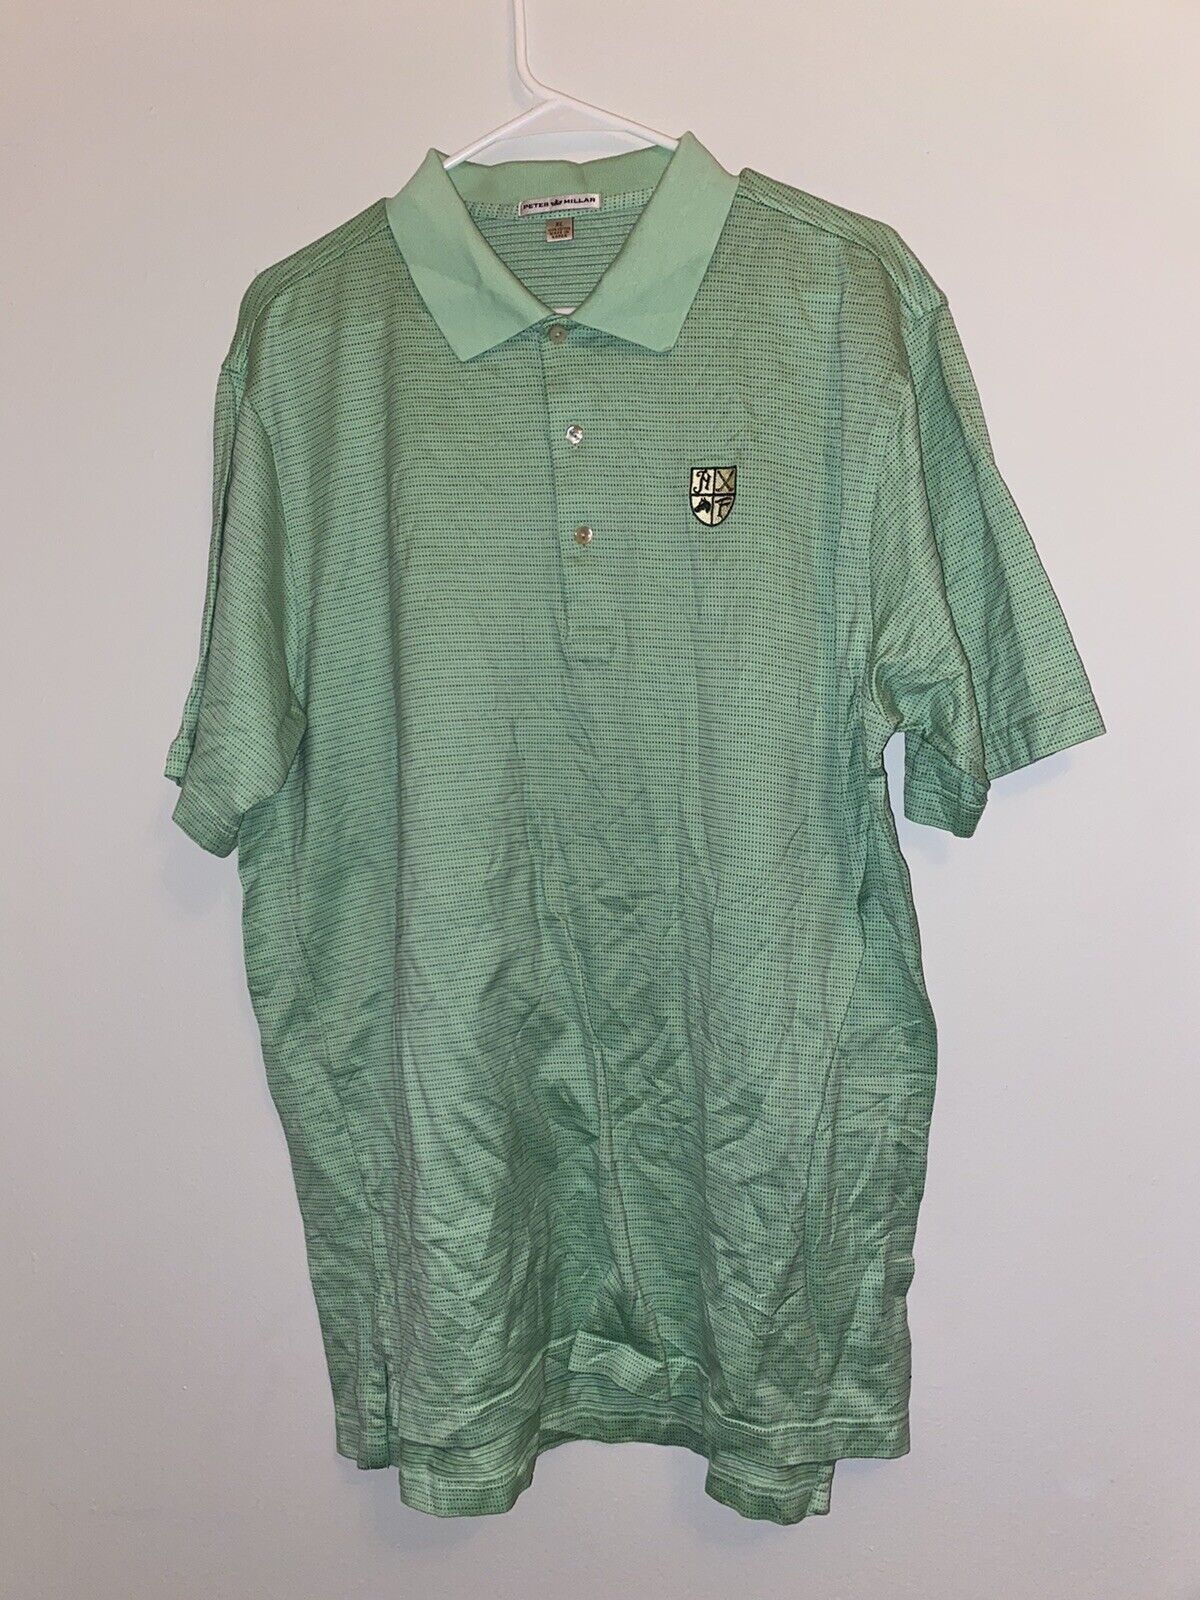 Lot of 2 Peter Millar S/S Shirts Polo Mens Sz XL Blue Green Golf Offers Accepted